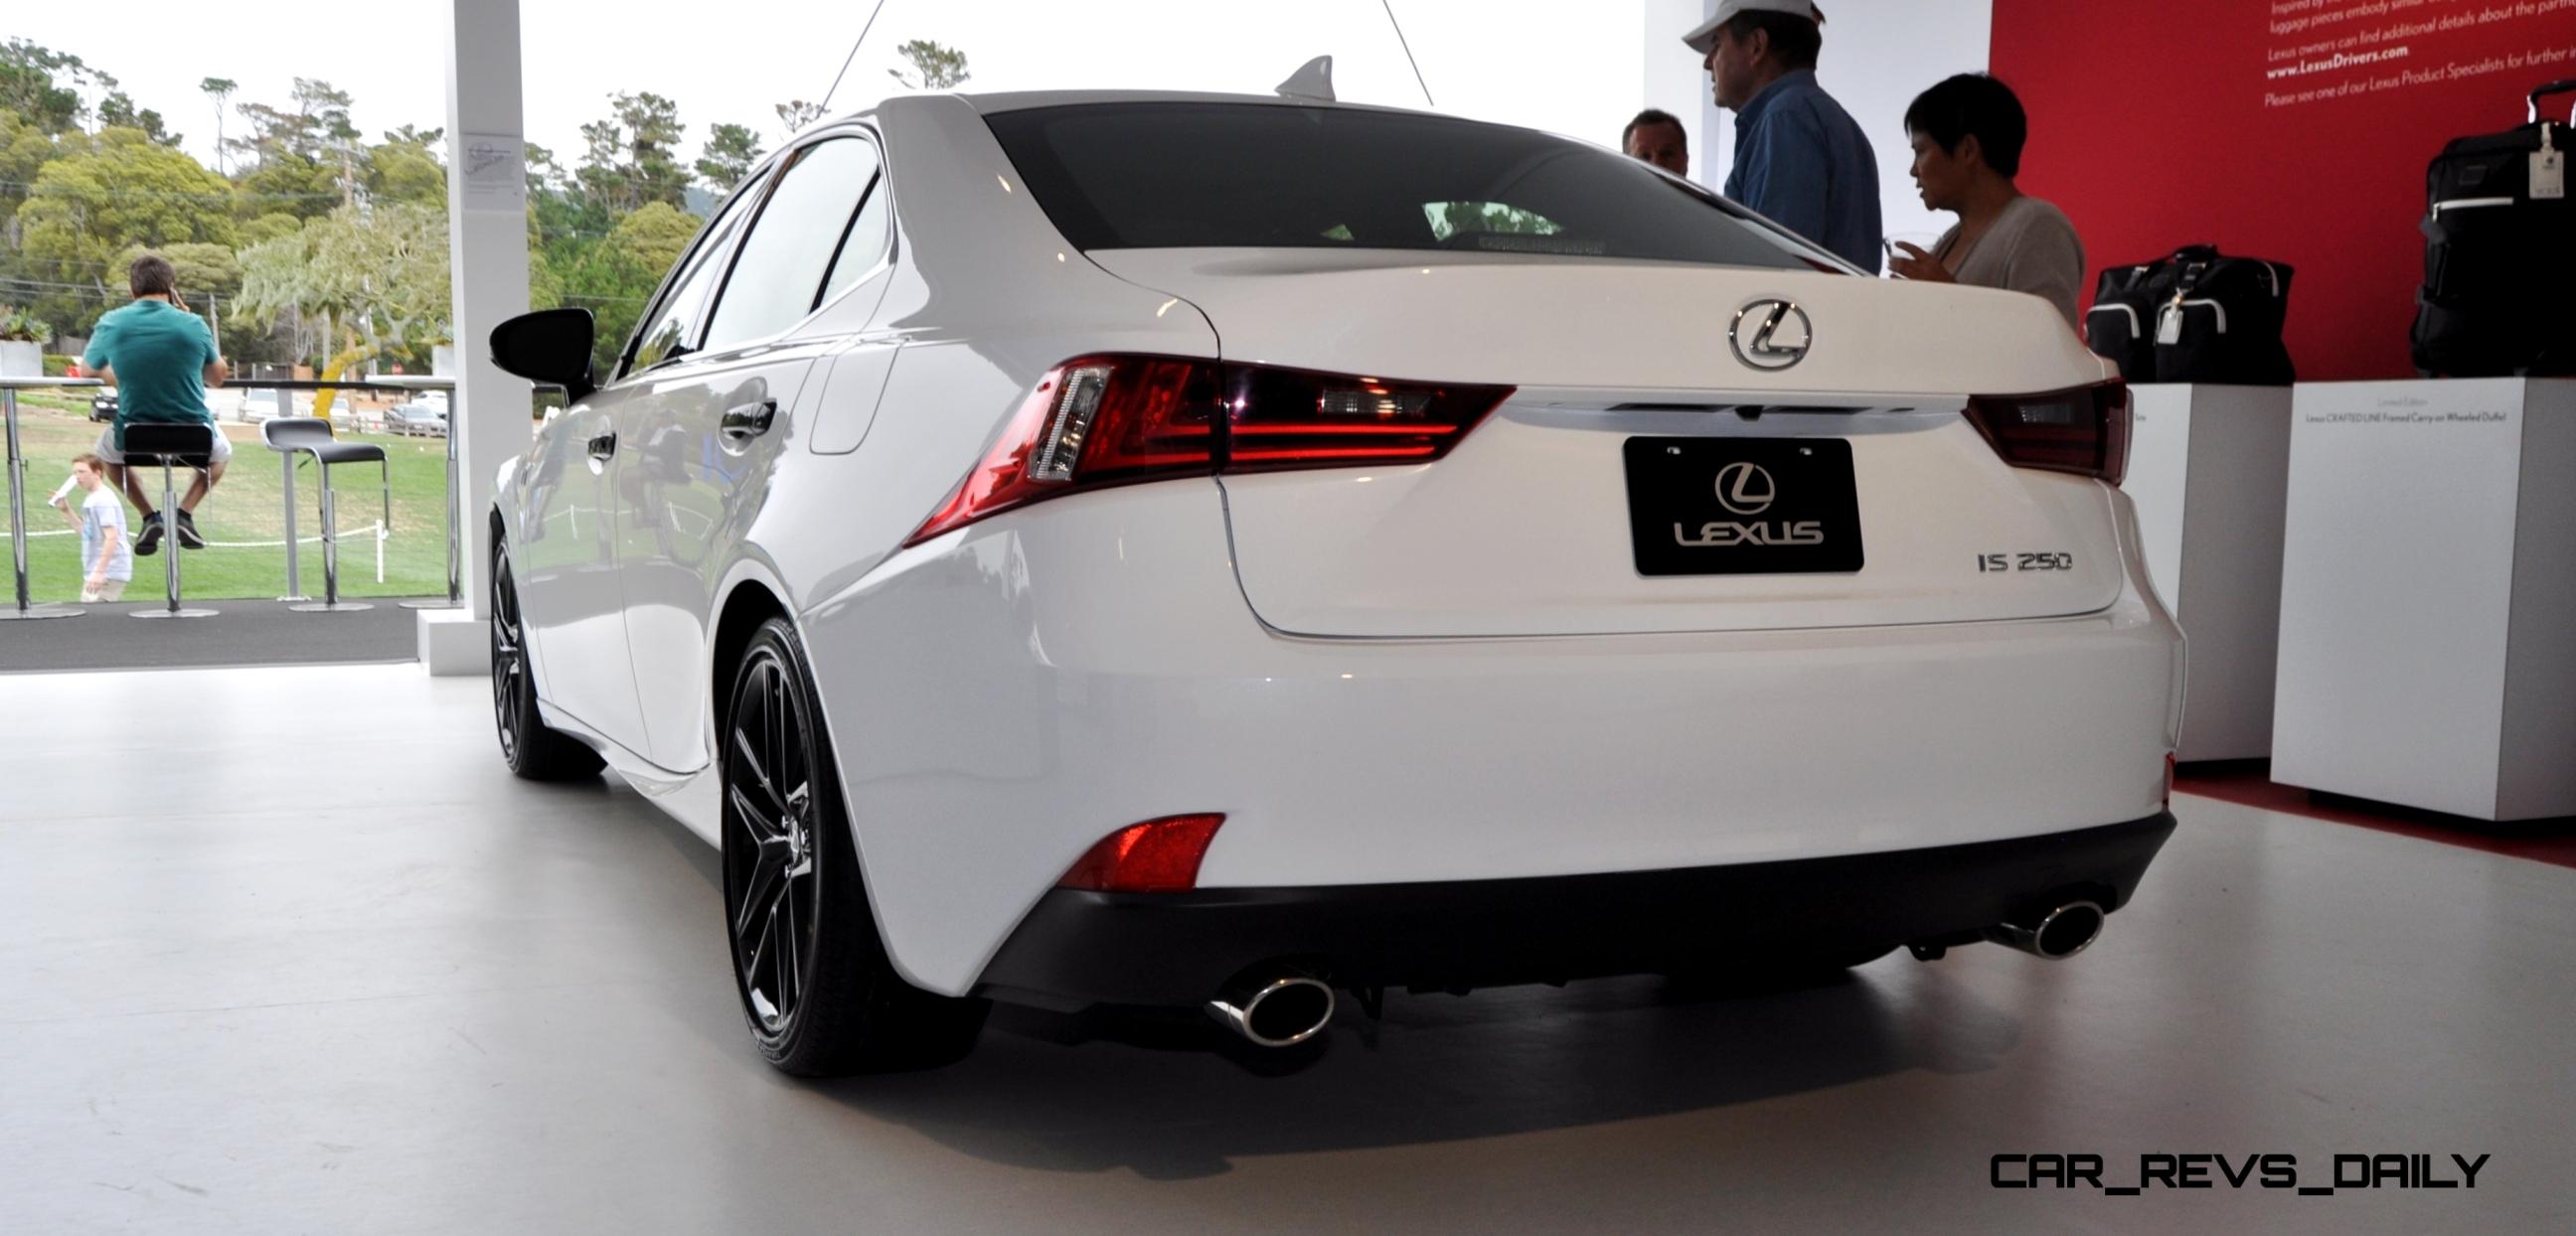 2015 Lexus Rx350 Crafted Line Pebble Beach Debut In Detail